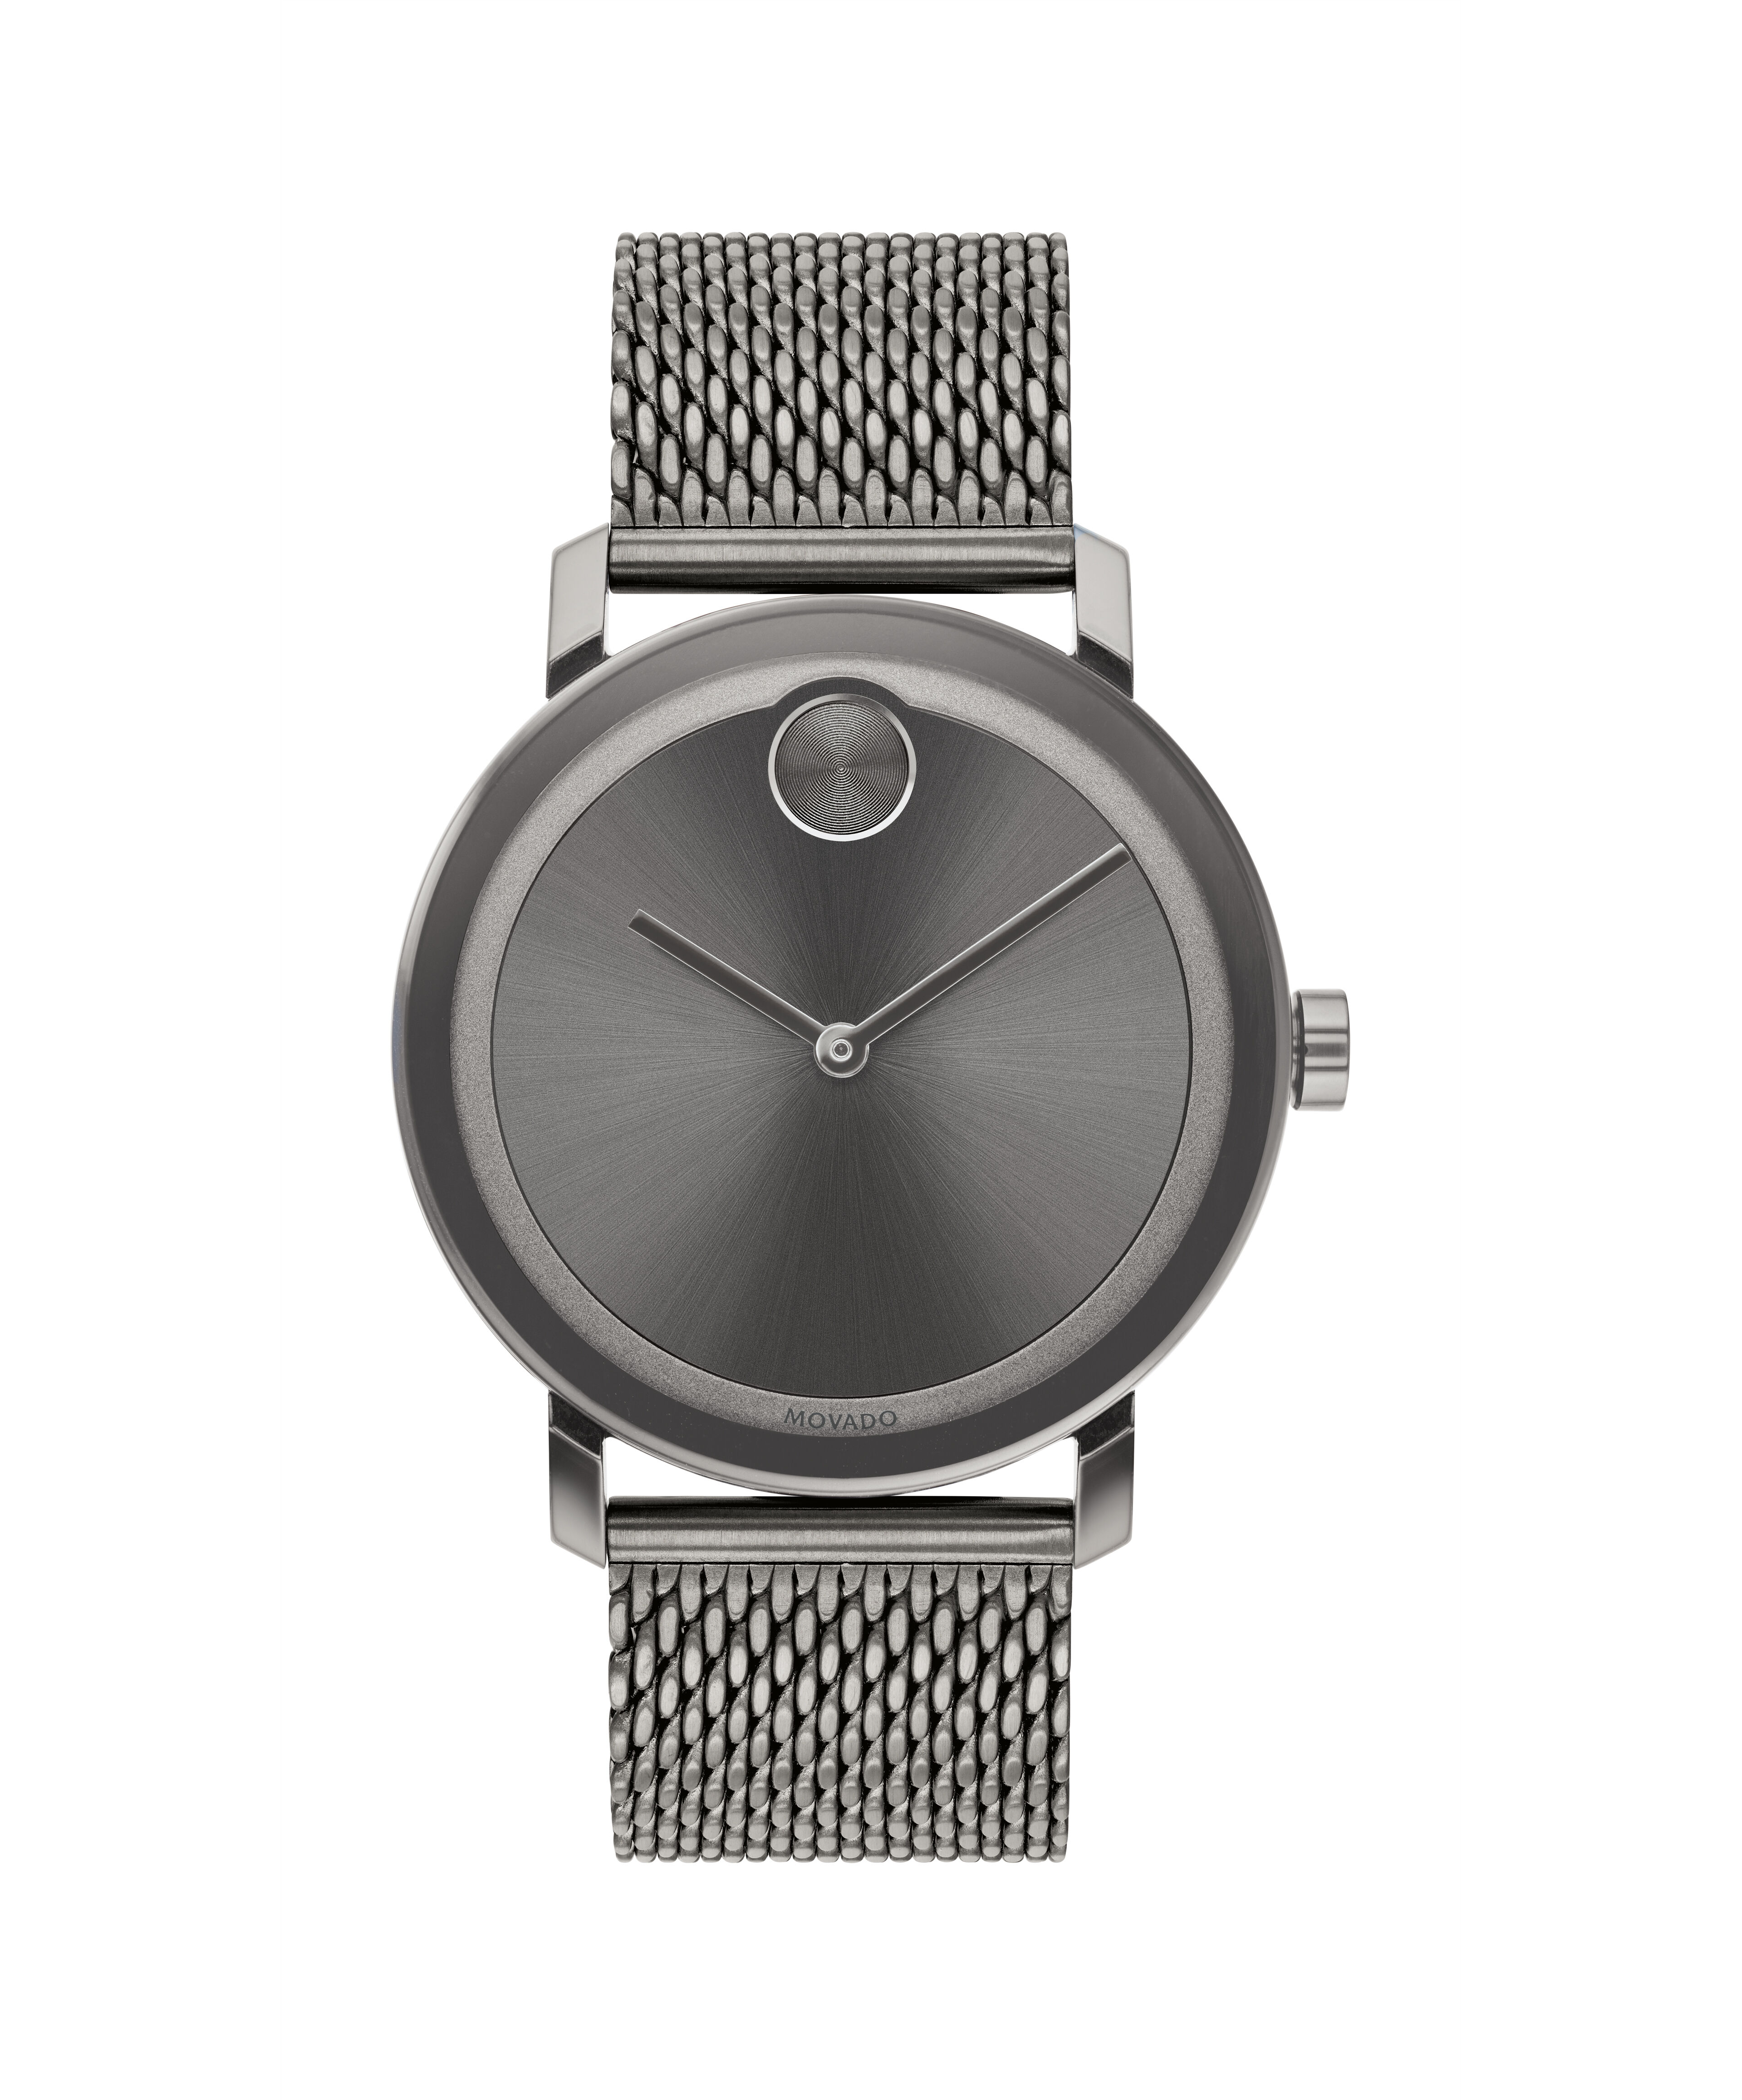 Movado Museum Classic Contemporary Steel Dial Black 25 mm. Ref. 84-01-827